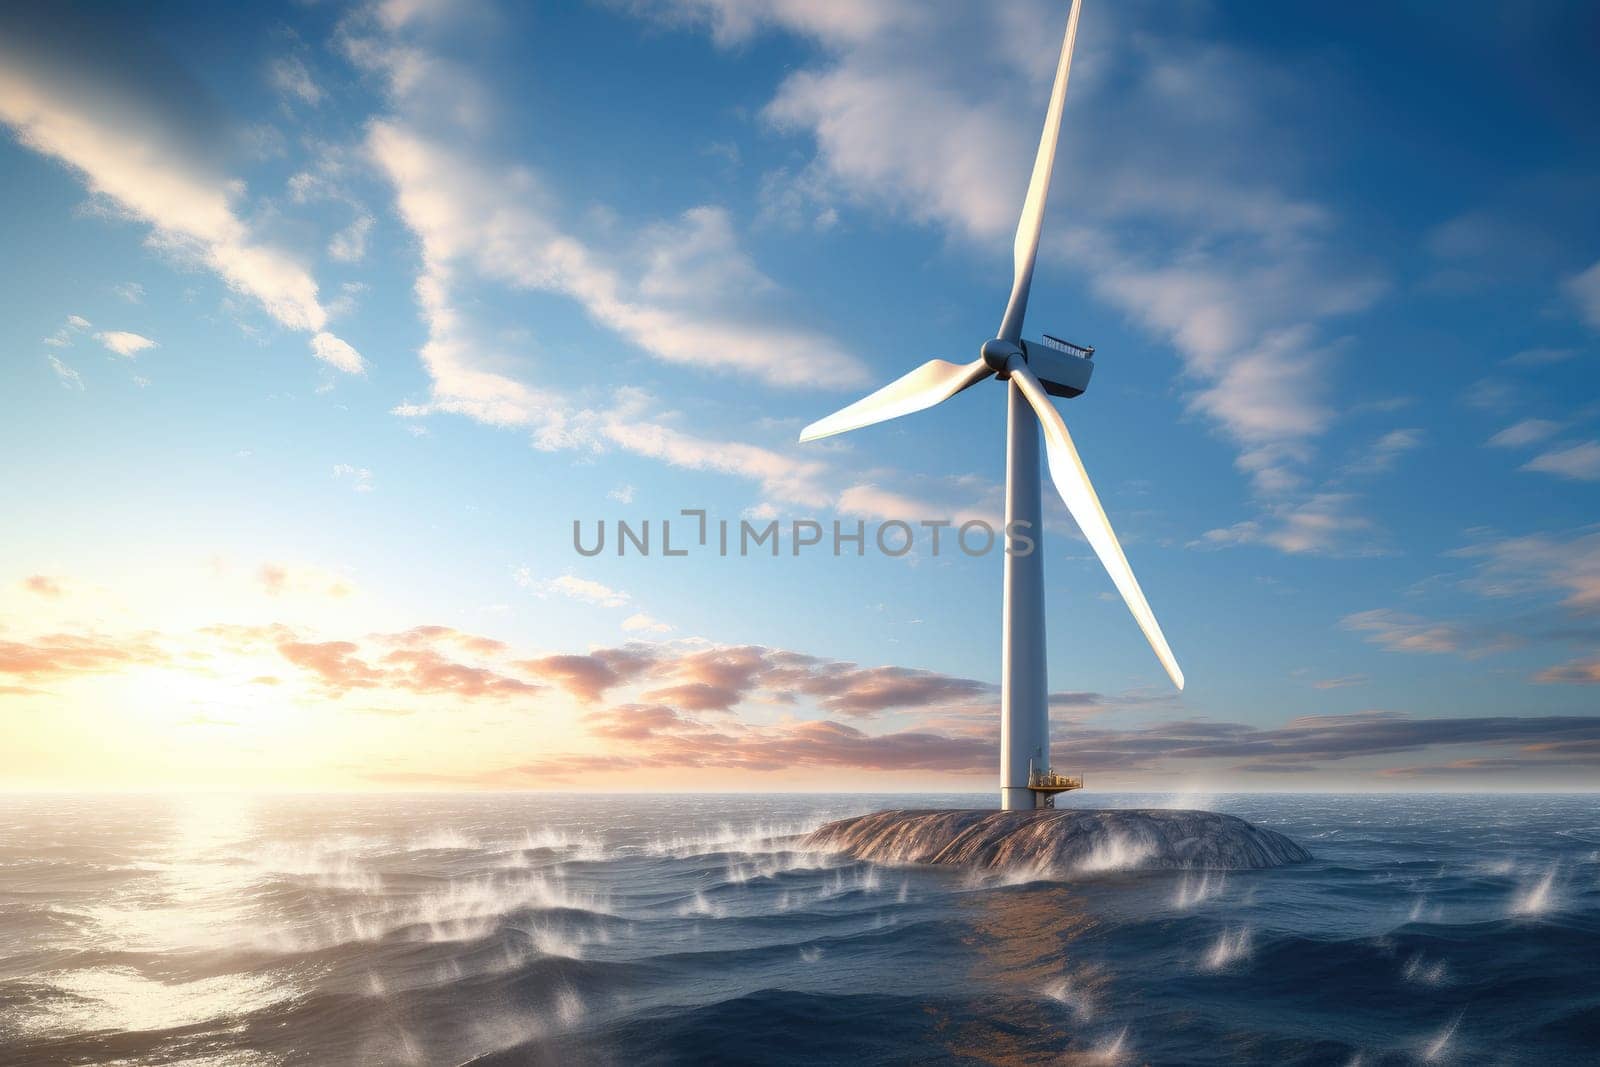 A wind turbine generating renewable energy, in motion among a clear blue sky in a vast field. The turbine's blades spin as it harnesses wind power for sustainable electricity production.